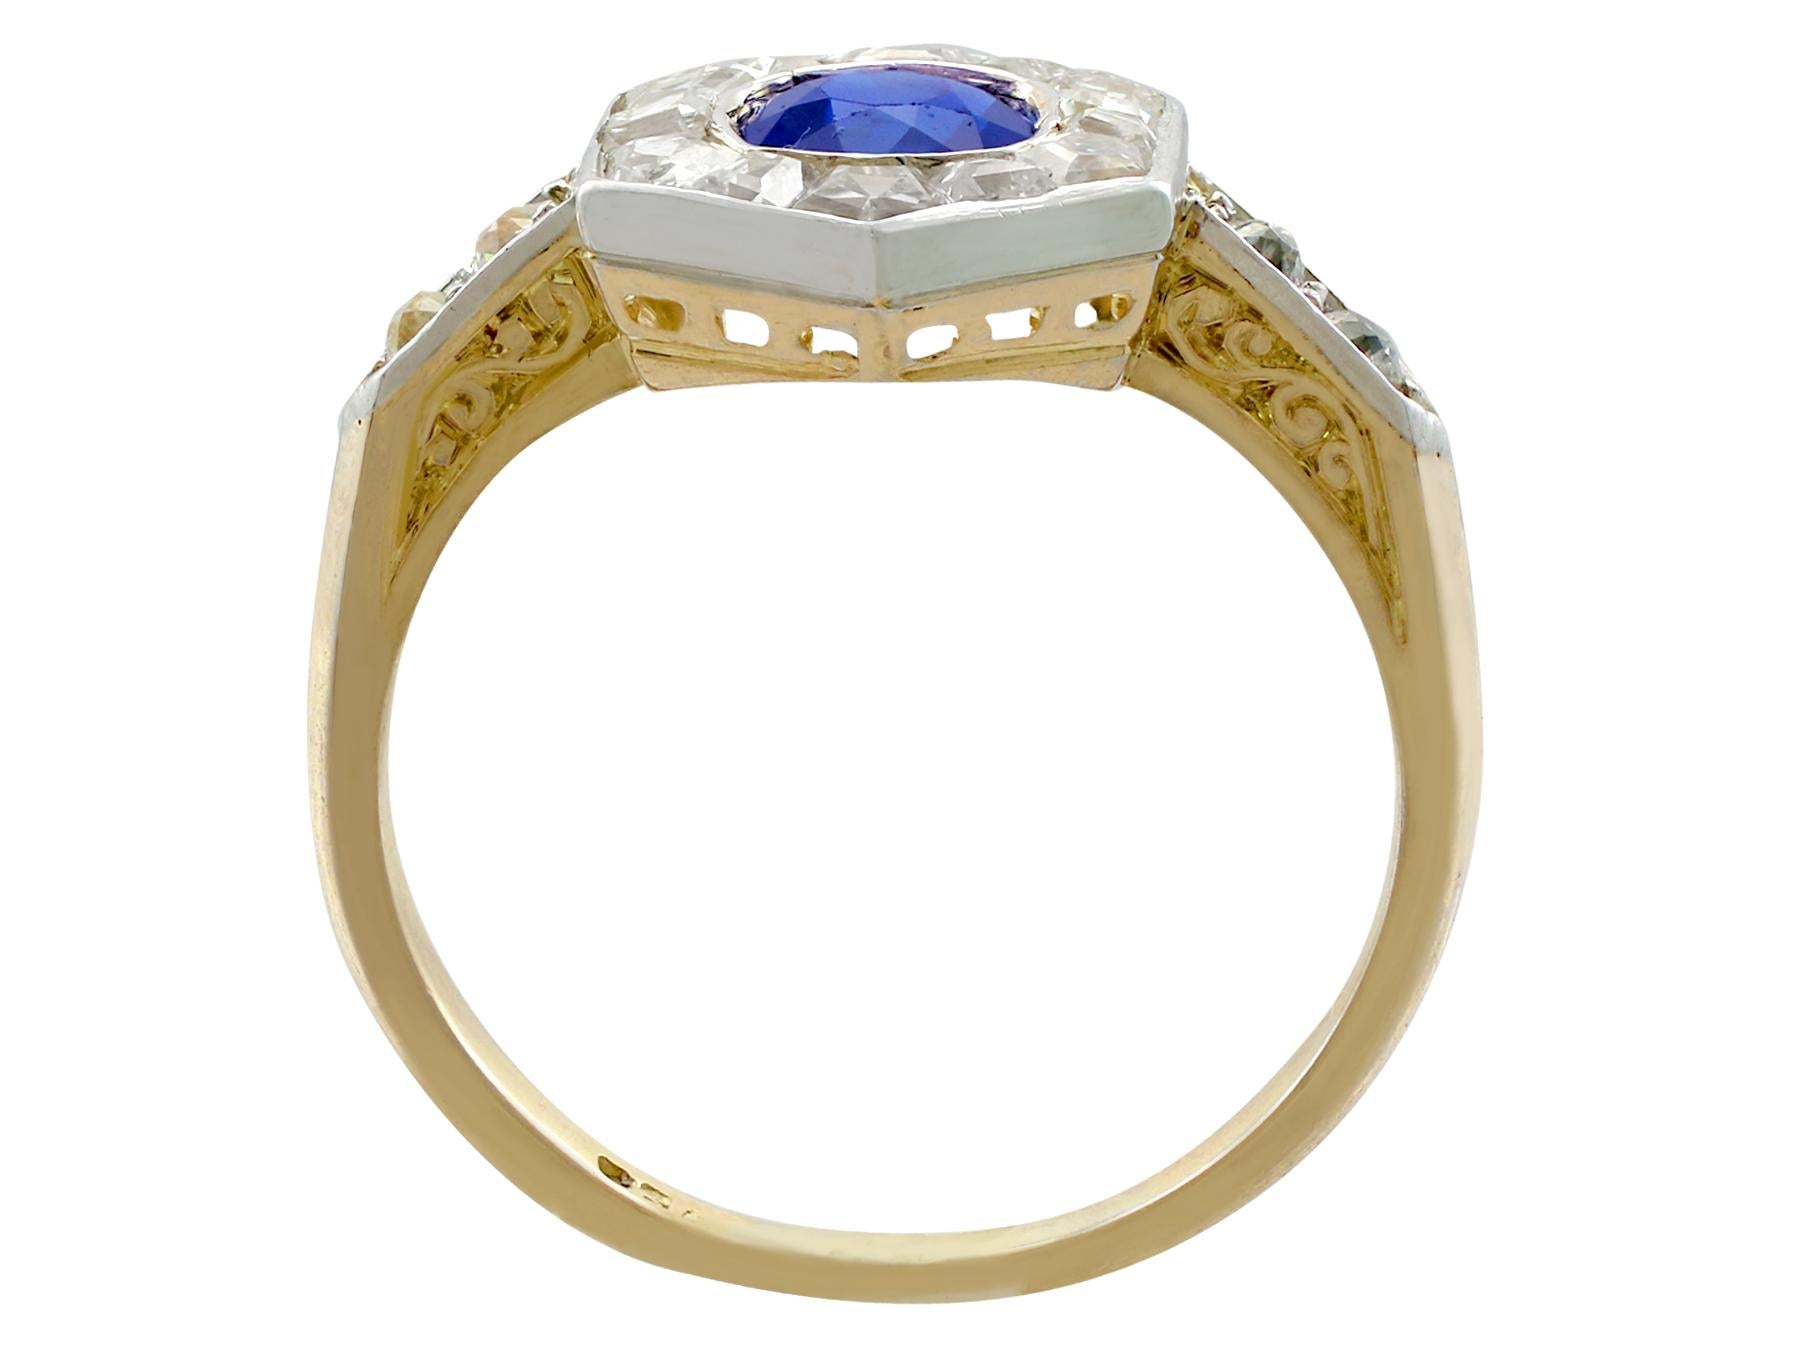 Antique French Sapphire and Diamond Yellow Gold Cocktail Ring In Excellent Condition For Sale In Jesmond, Newcastle Upon Tyne